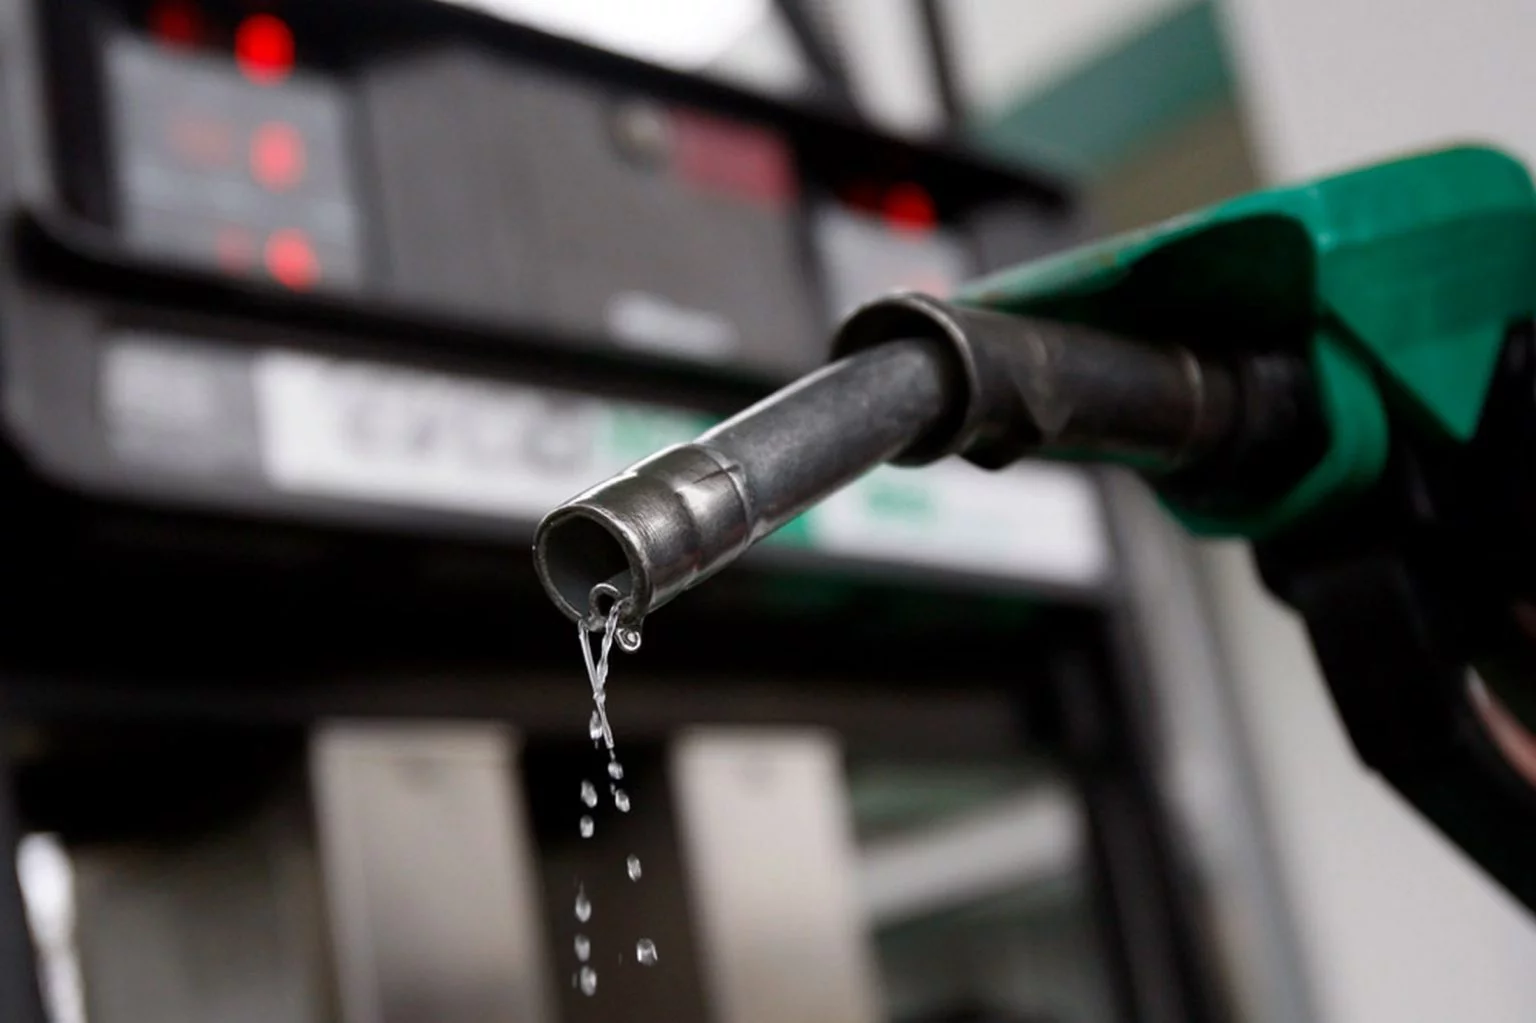 GOODNEWS: Fuel to sell N500 per litre